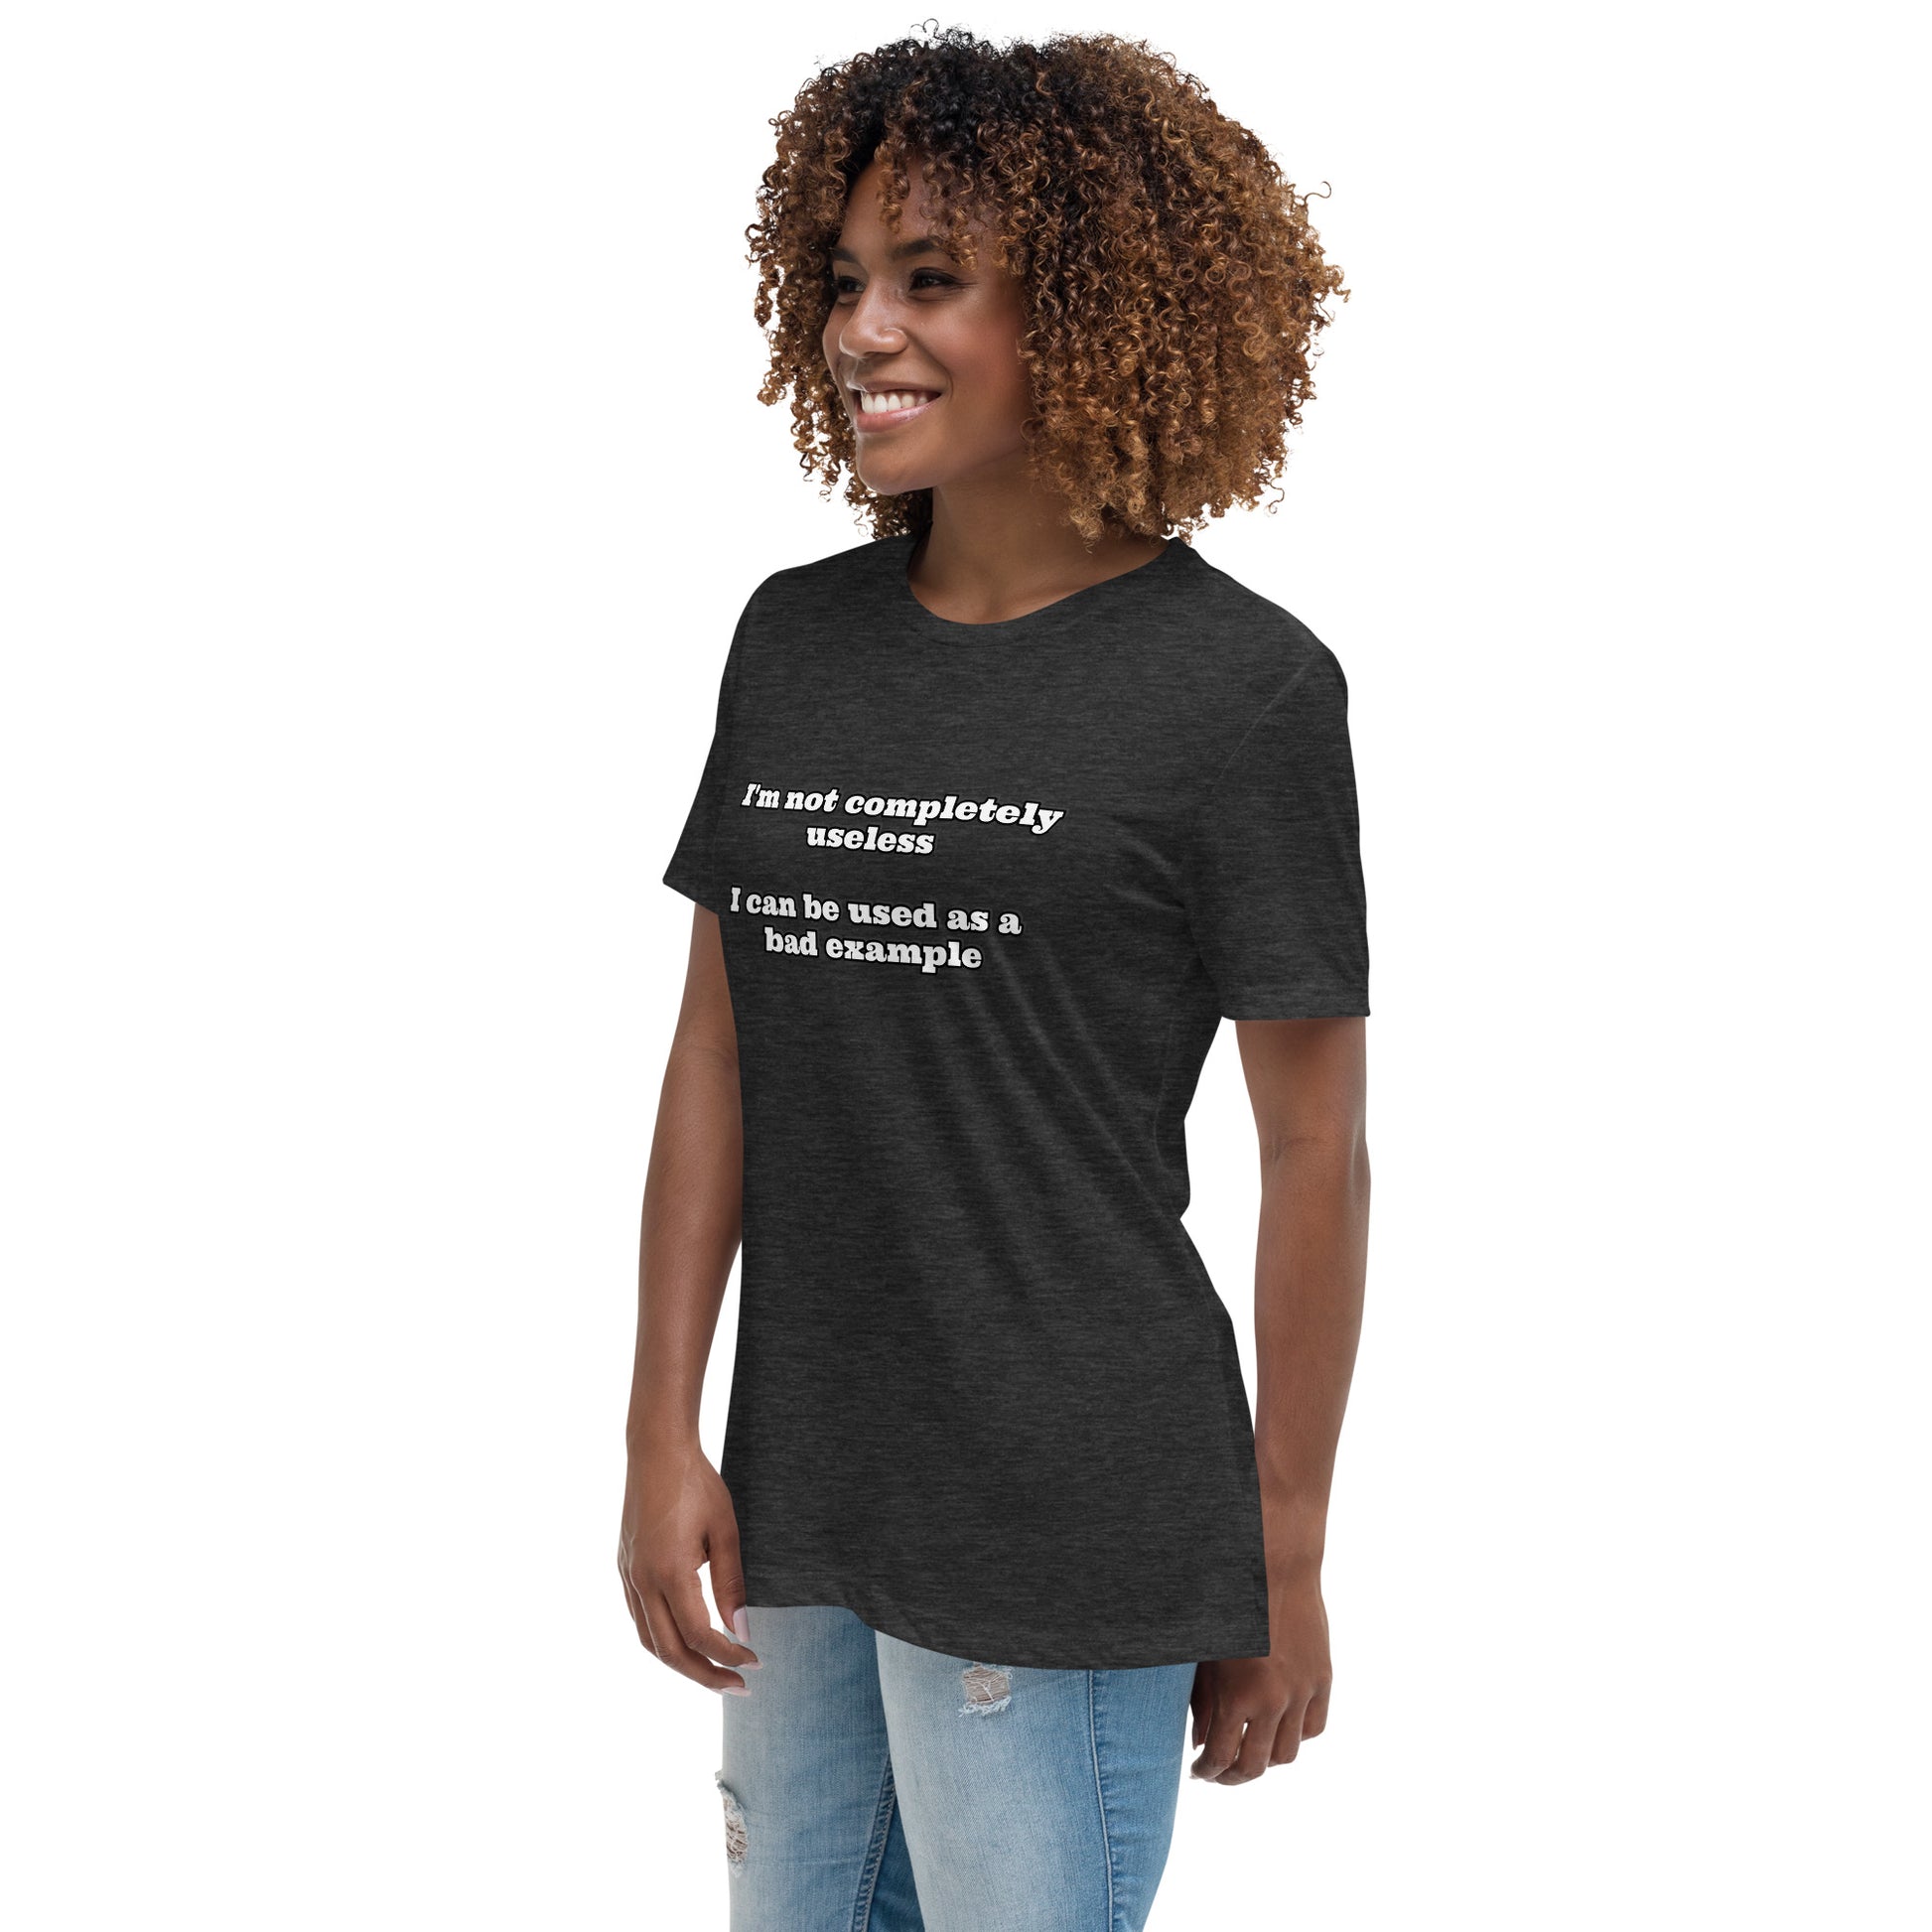 Women with dark grey t-shirt with text “I'm not completely useless I can be used as a bad example”